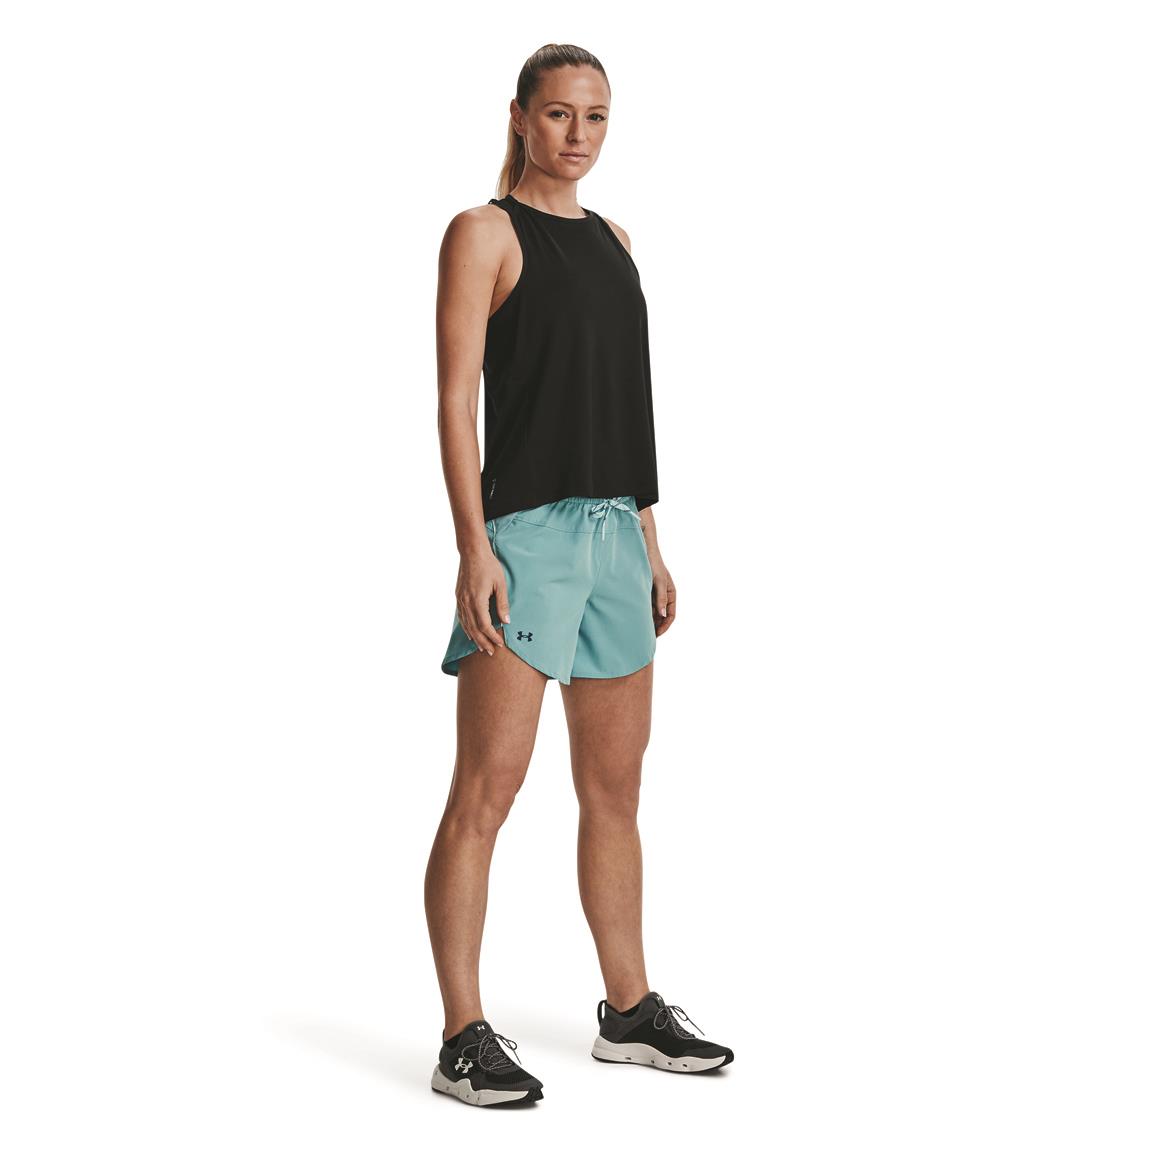 Under Armour Women's Fusion Shorts, Solid, Cloudless Sky/deep Sea